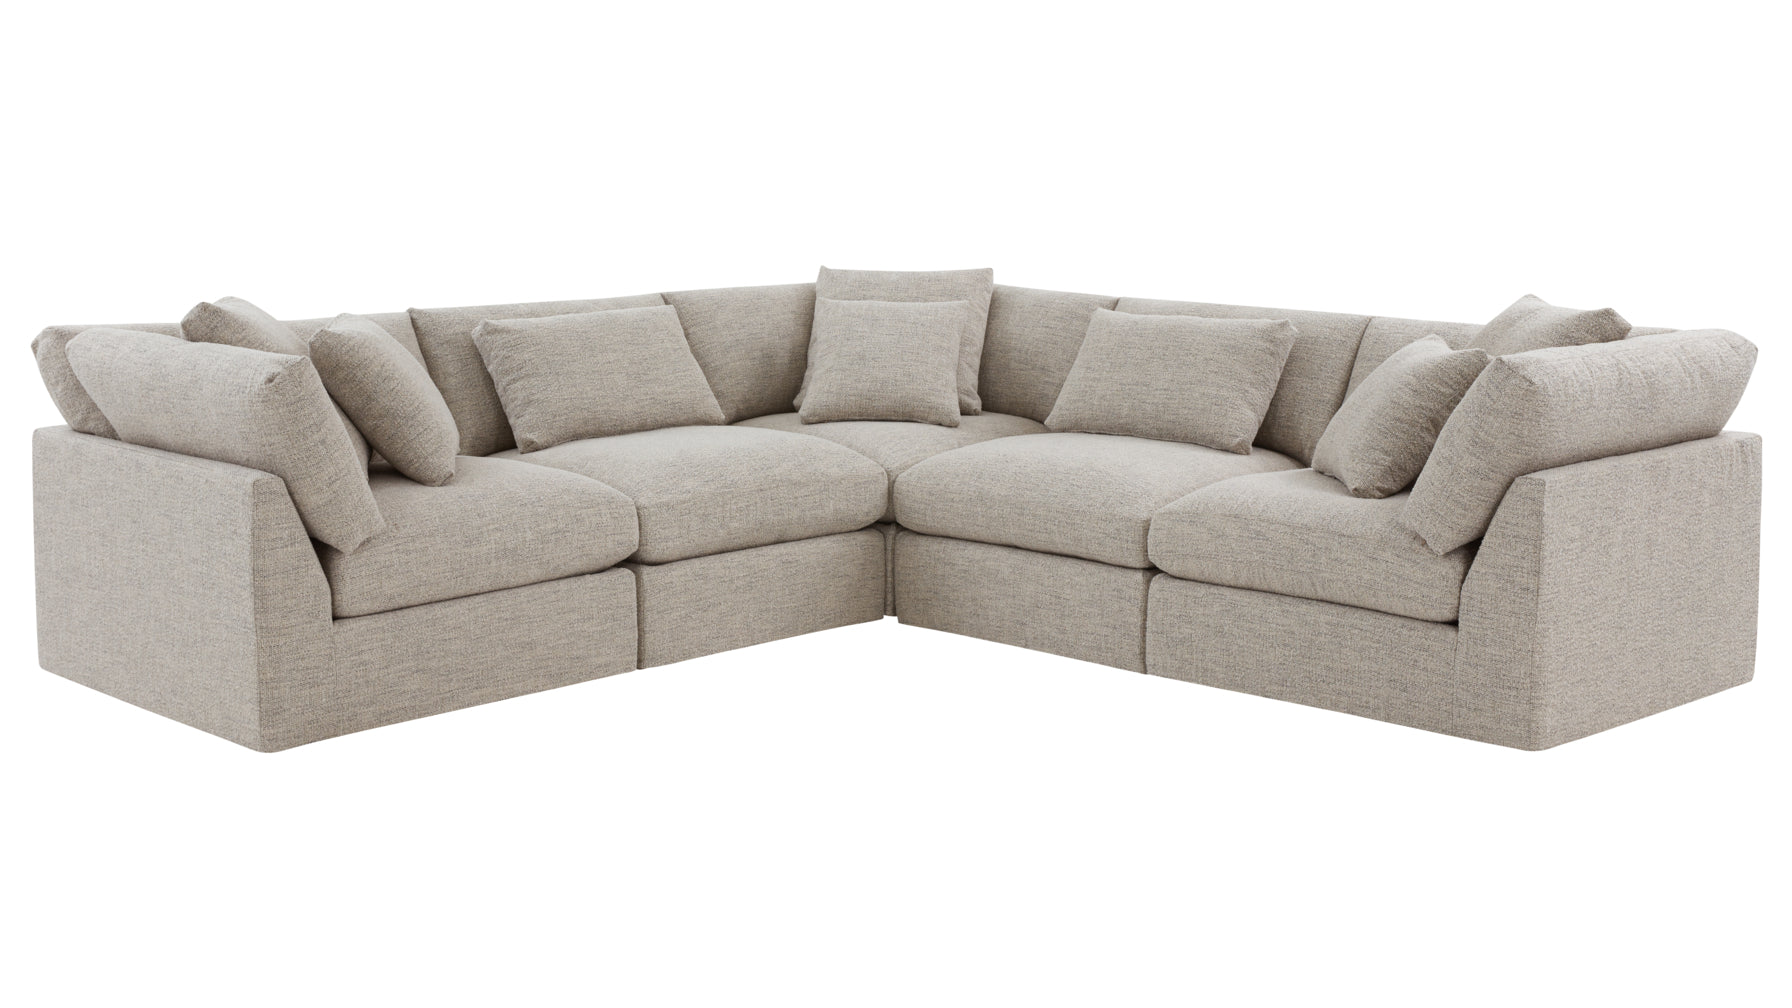 Get Together™ 5-Piece Modular Sectional Closed, Large, Oatmeal - Image 2